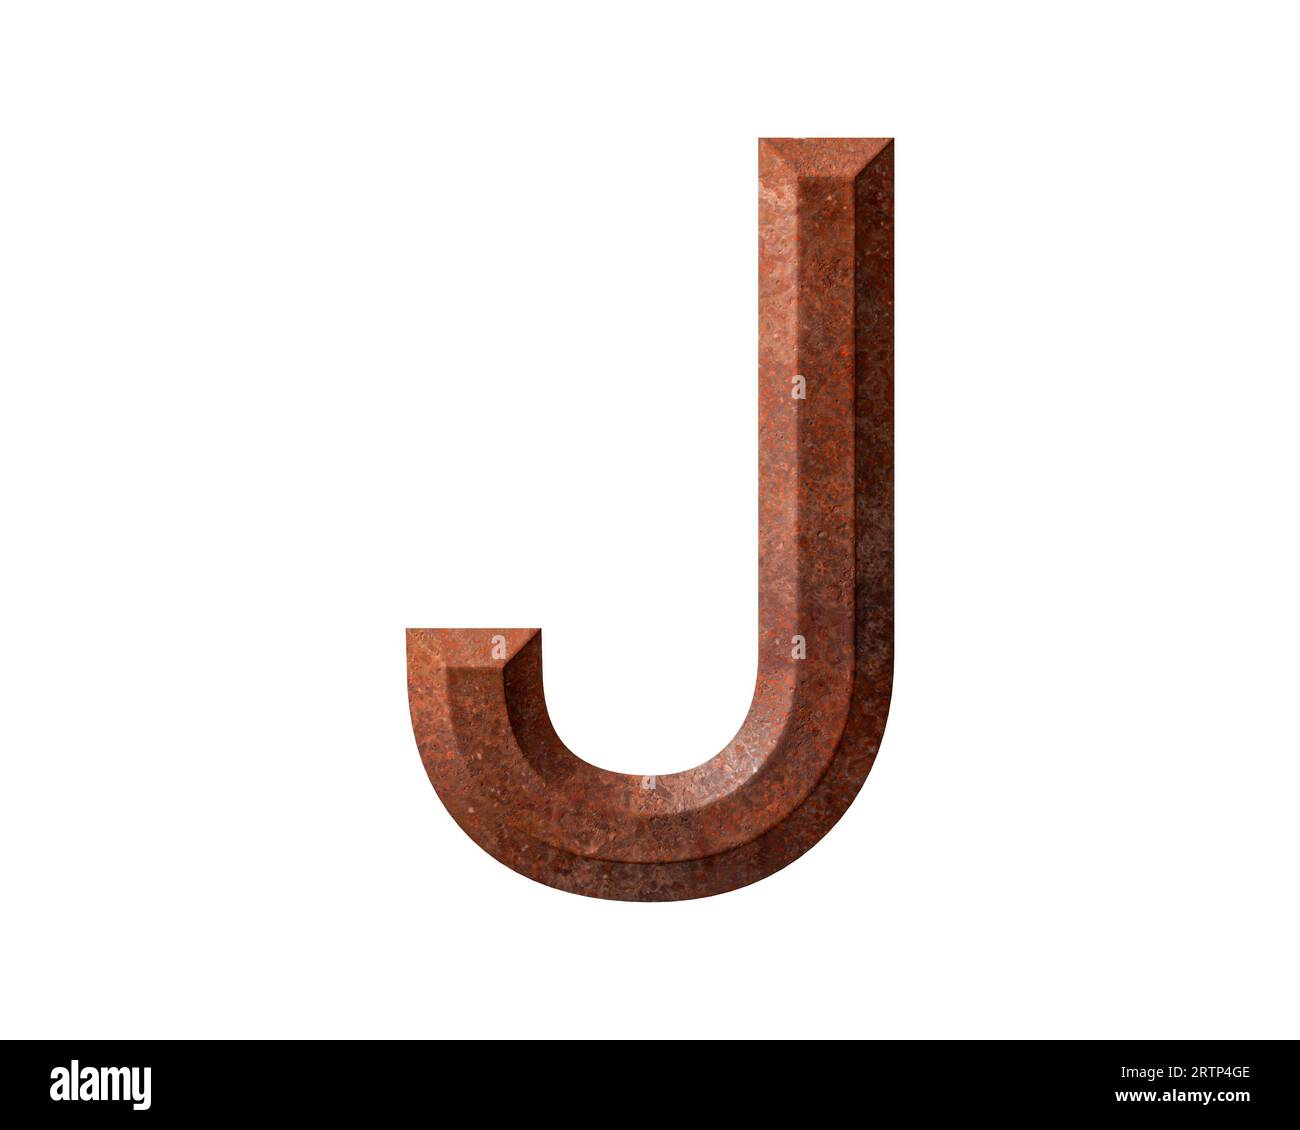 Letters made of rusty metal. 3d illustration of rust iron alphabet isolated on white background Stock Photo